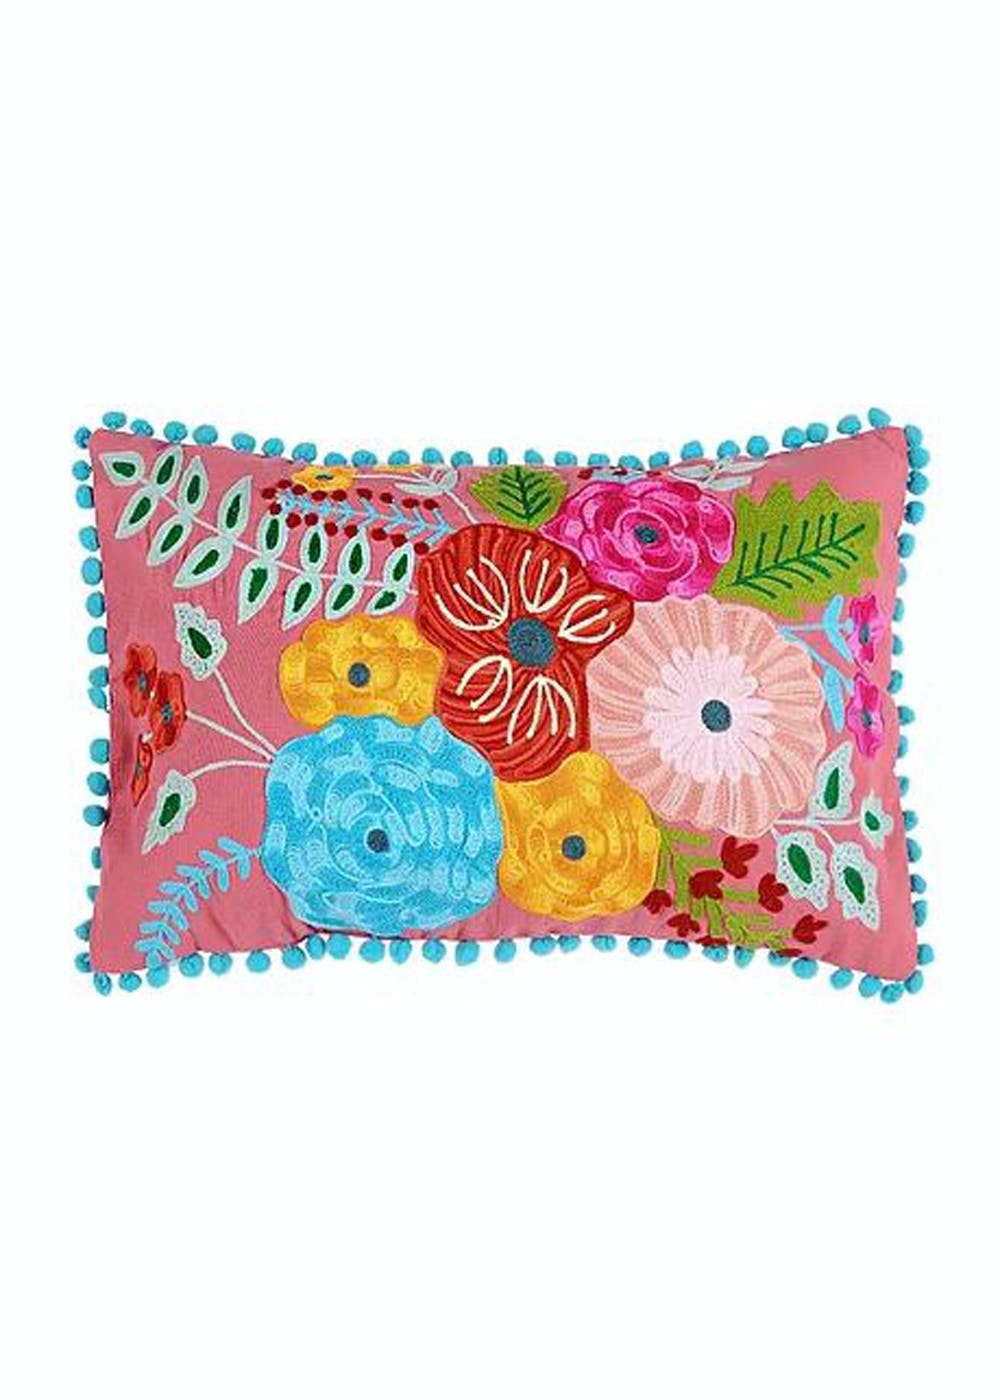 Frida Kahlo Inspired Lavender Crewel-Embroidered Cotton Cushion Cover